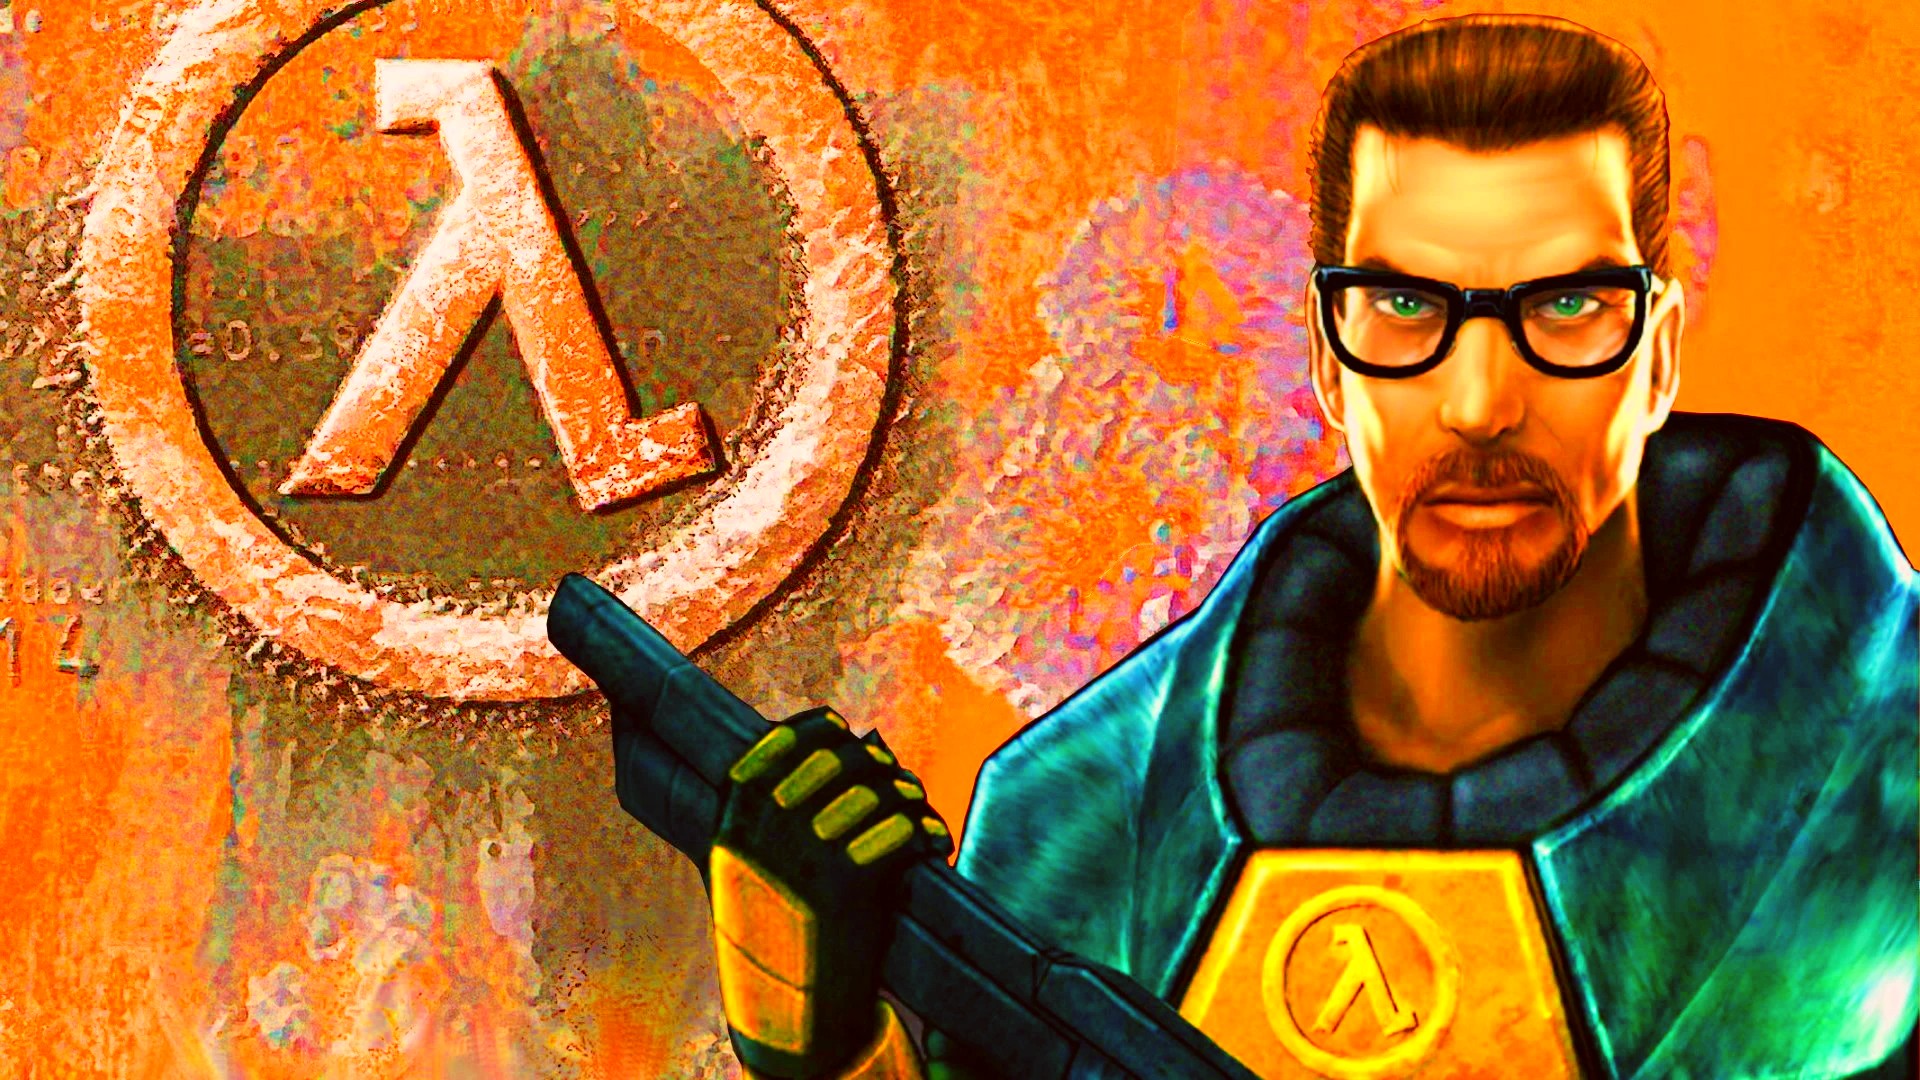 Half-Life players are planning to break a Steam world record